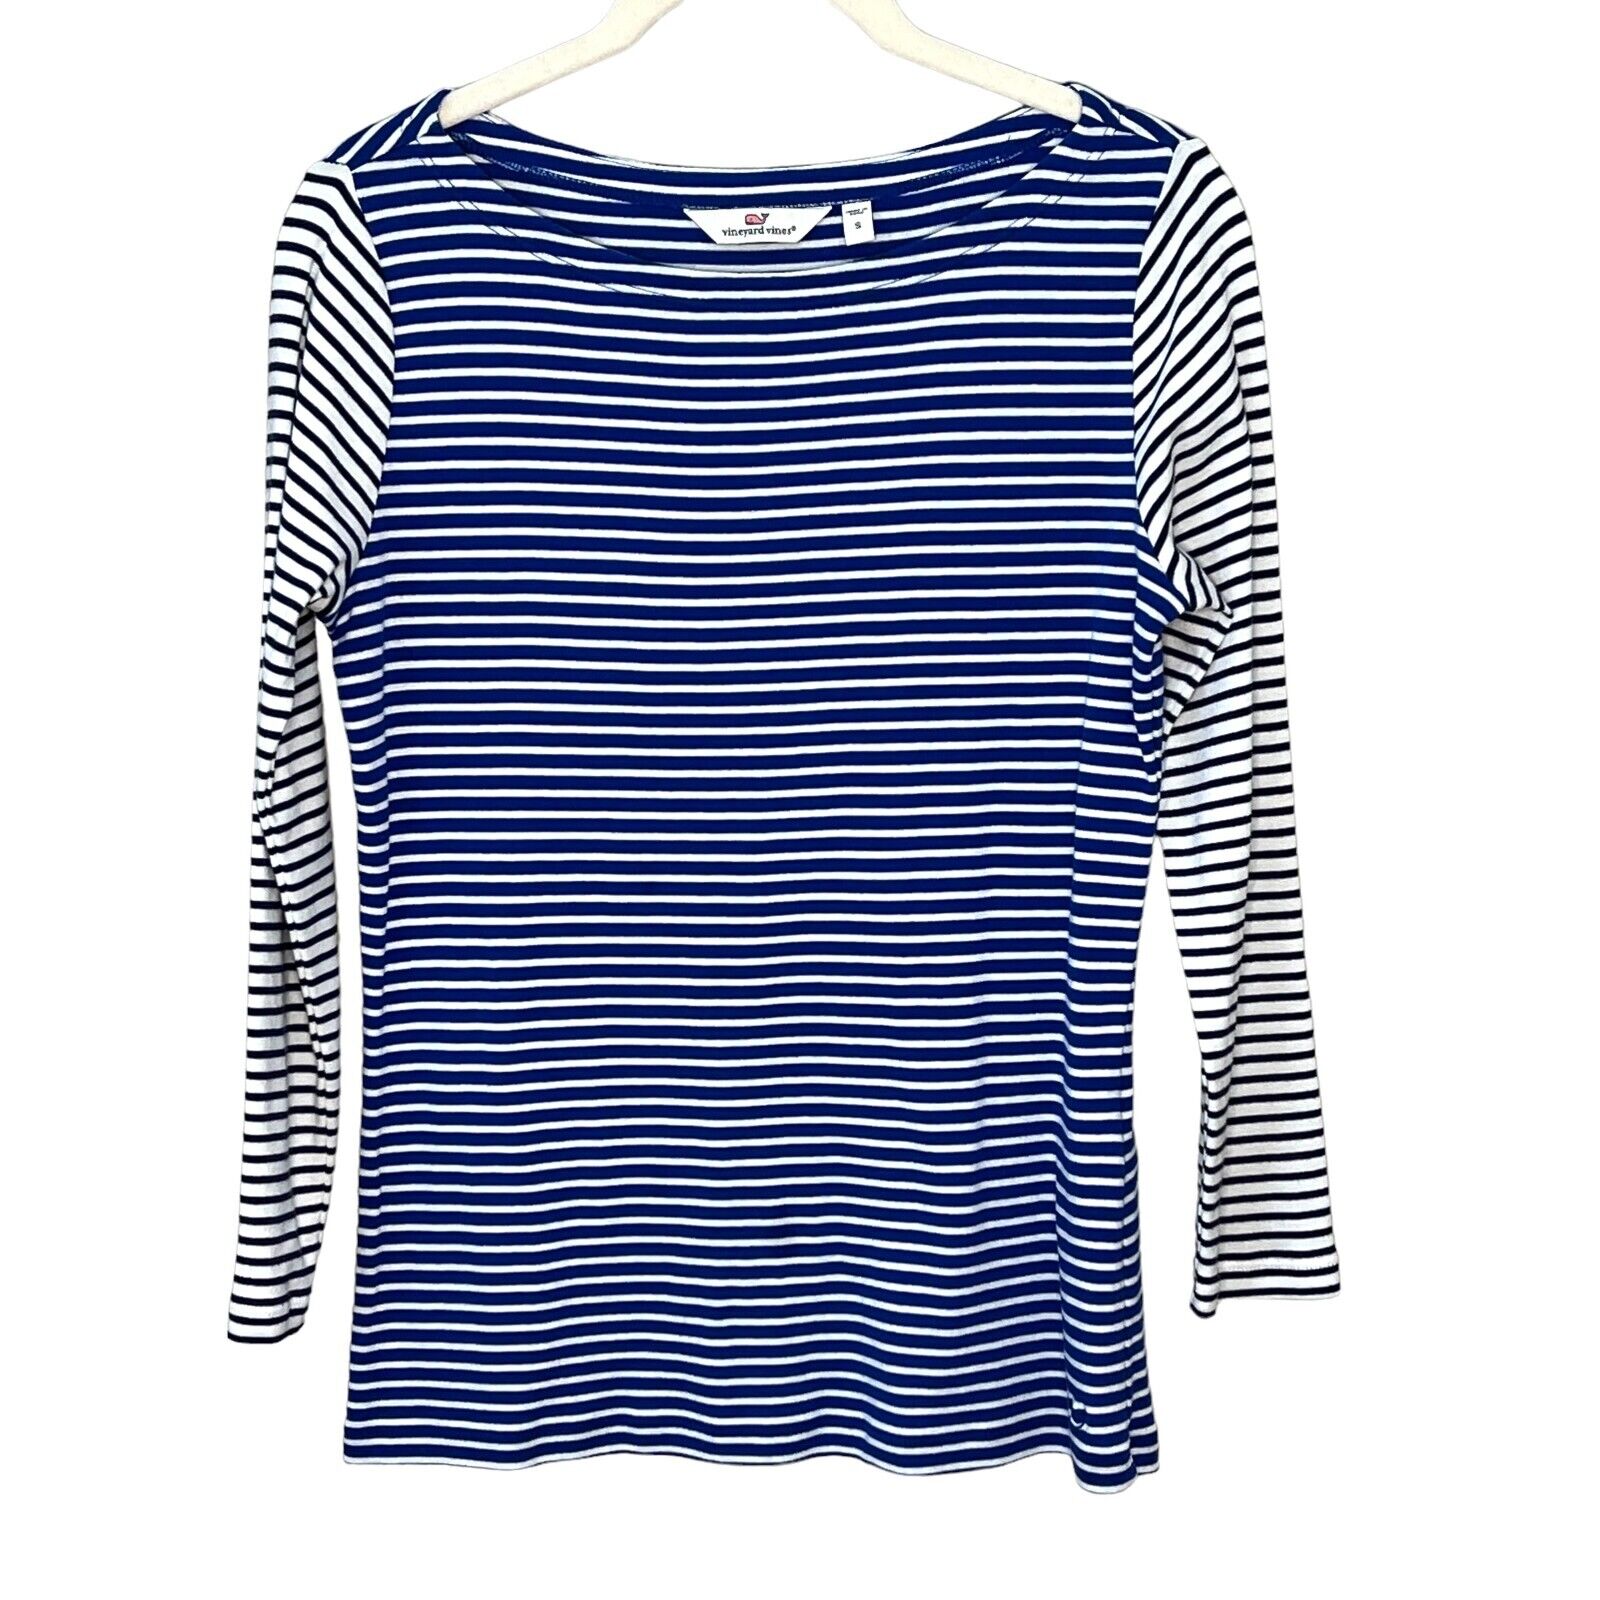 Vineyard Vines Maritime Blue Party Stripe Simple Boatneck Tee Top Size Small